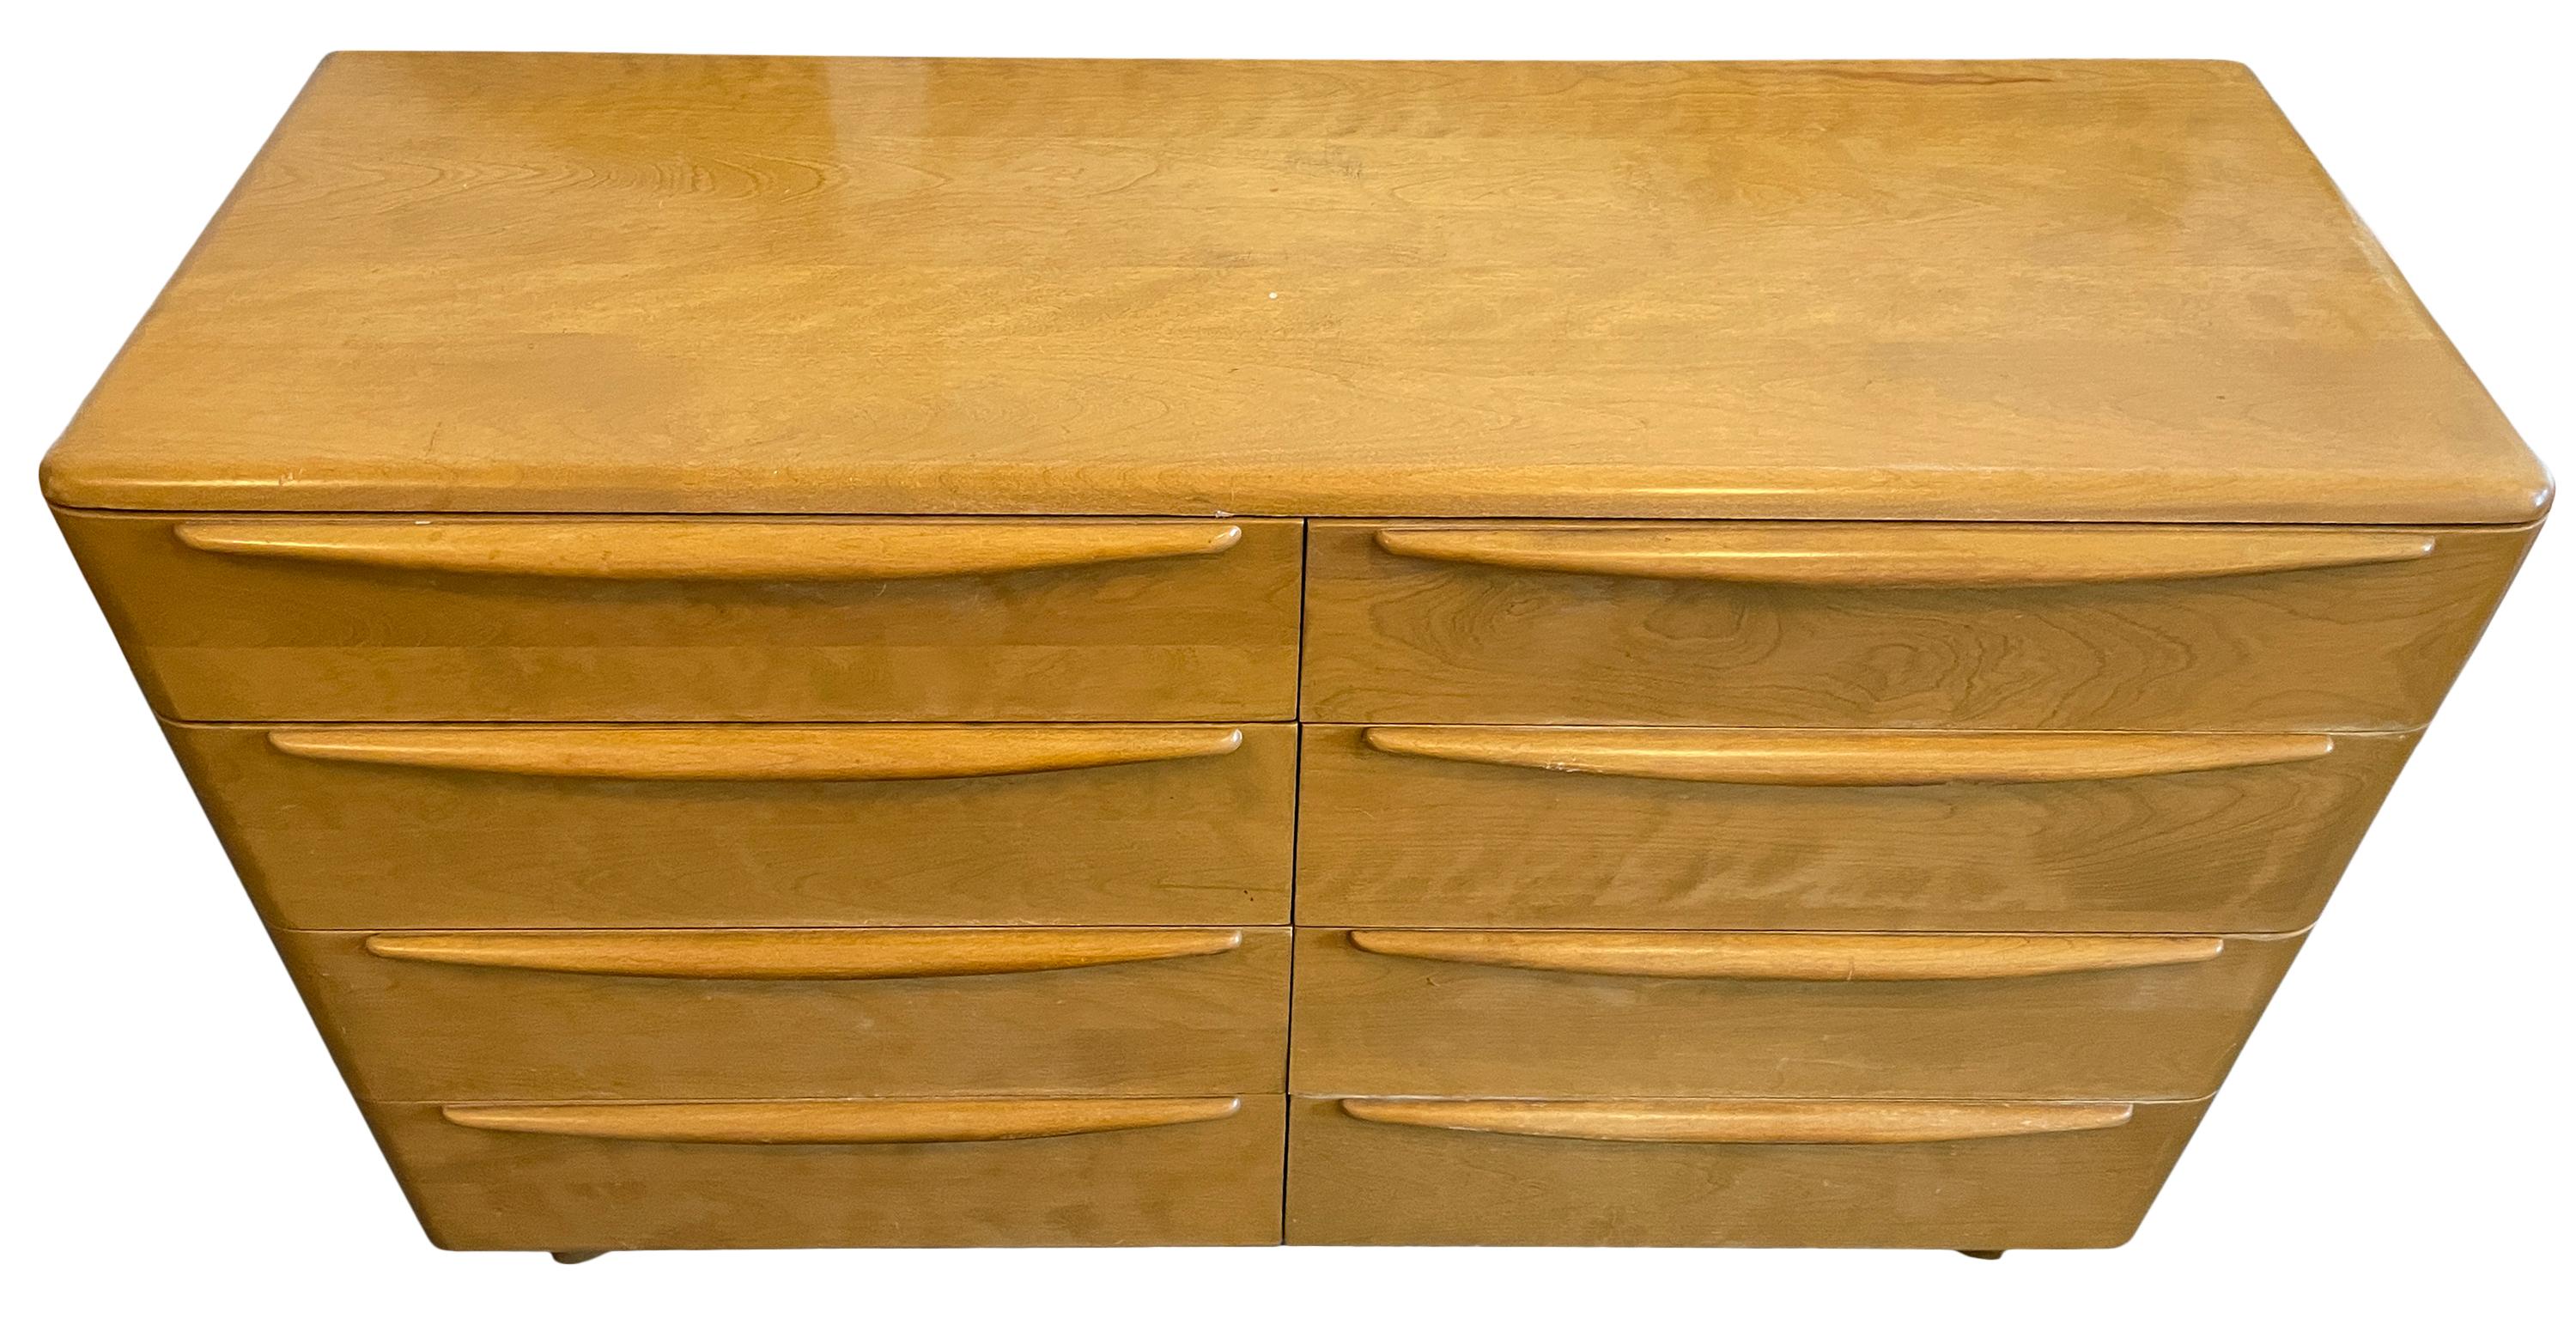 Mid-Century Modern Blonde solid Maple 8 Drawer dresser by HEYWOOD WAKEFIELD. Good Vintage Condition clean inside and out. Drawers slide smooth. Very unique mid century and deco design. Labeled in drawer. Located In Brooklyn NYC.